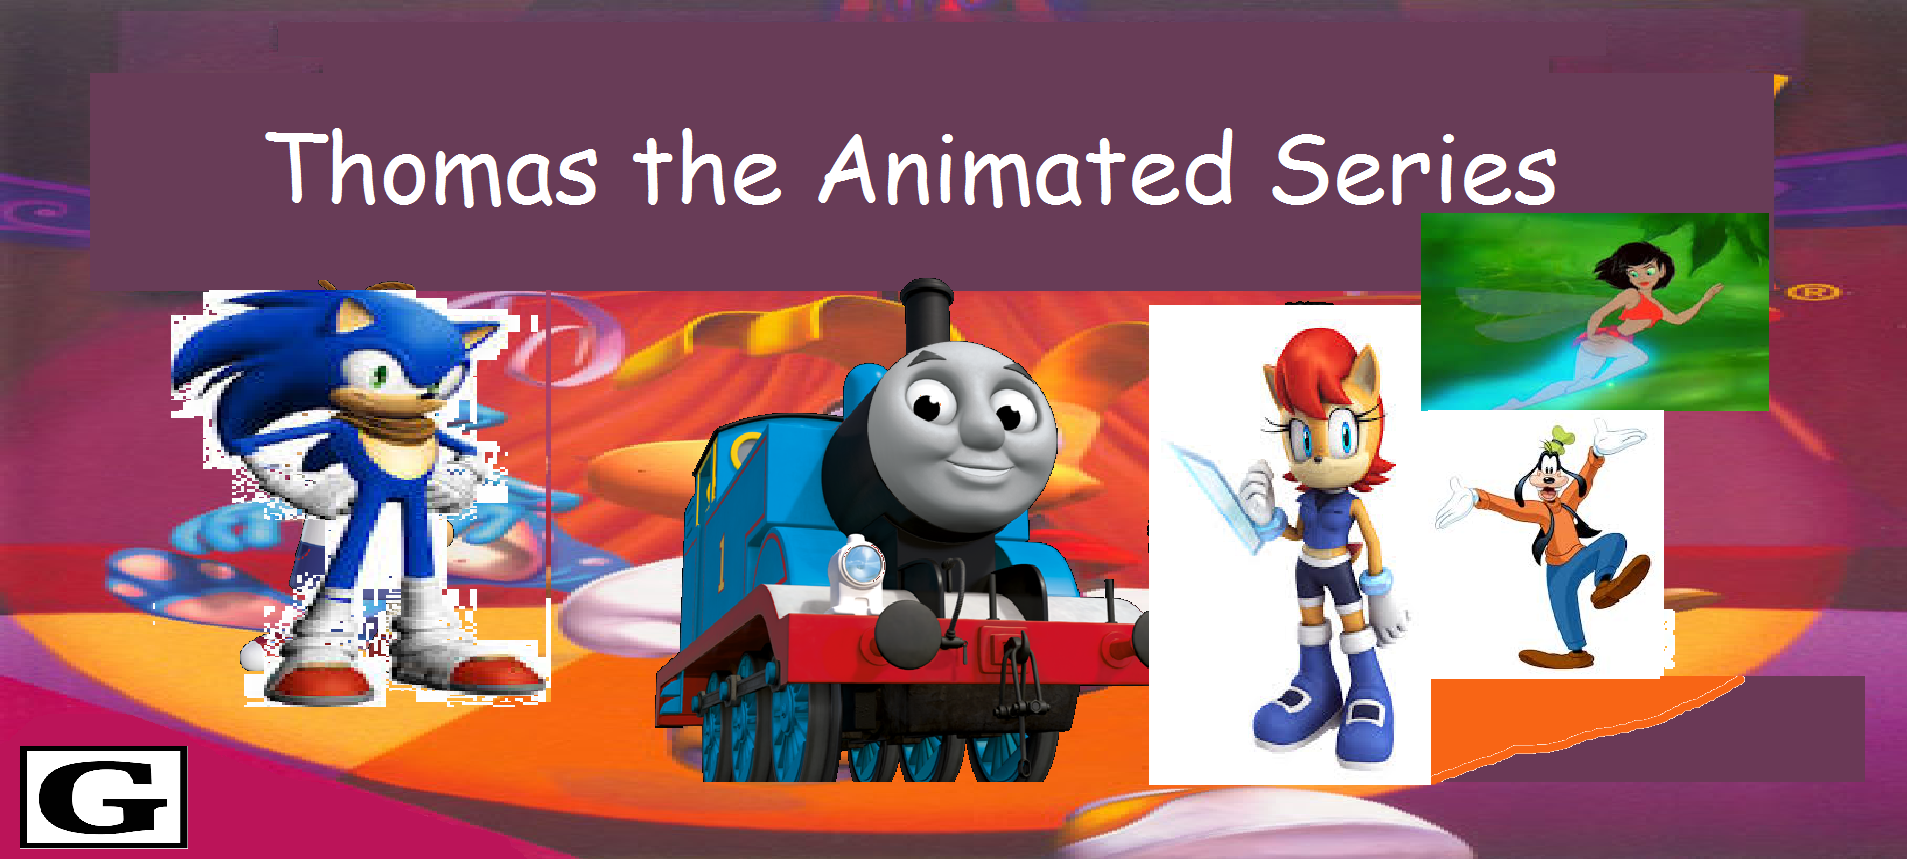 All Monster Cursed Thomas, Choo Choo Charles, Car Eater, Bus Eater,  Toby,Percy in Garry's Mod 